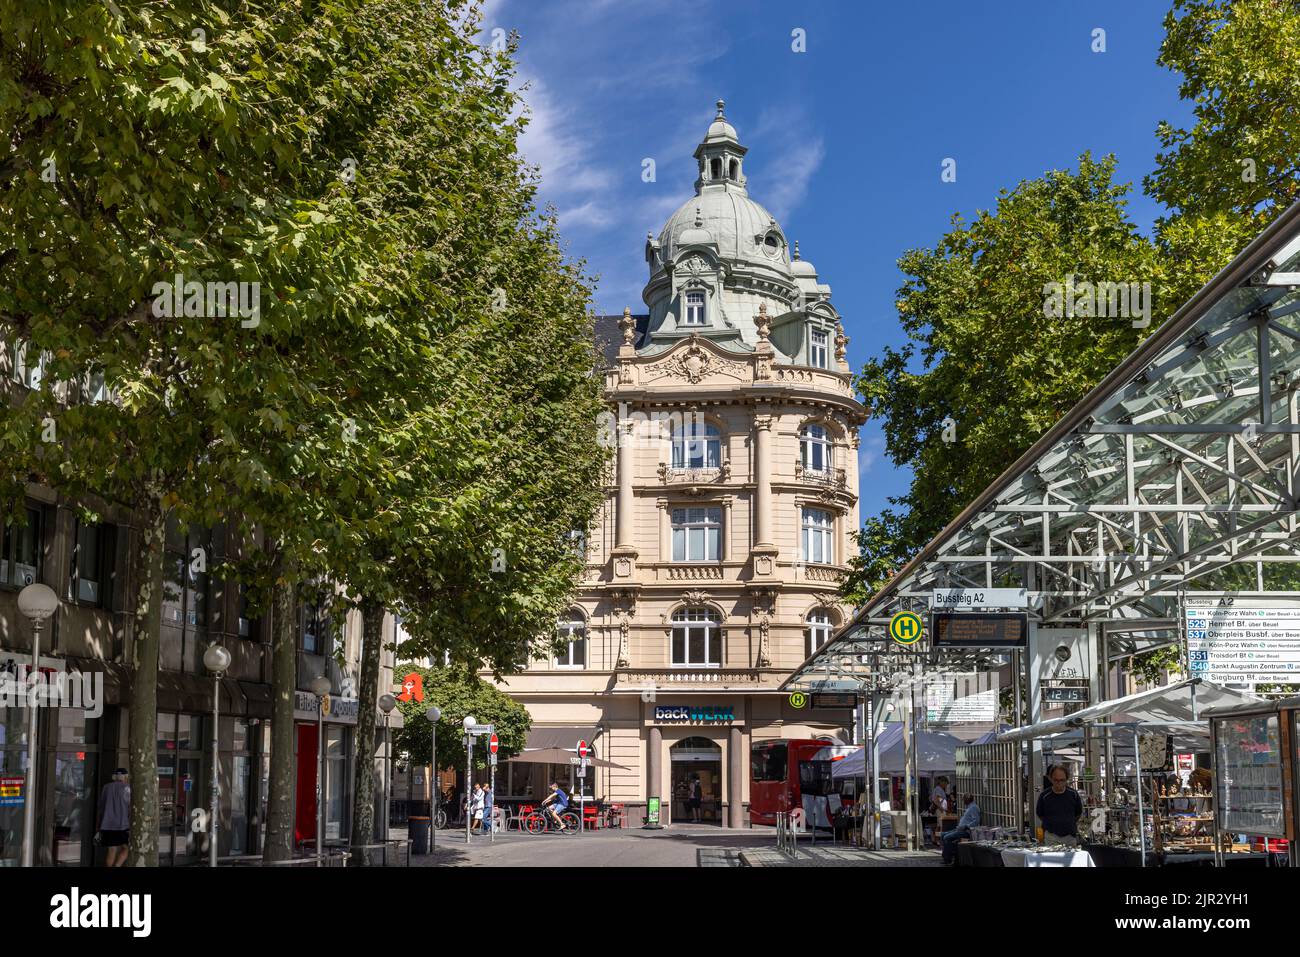 Historical buildings and narrow streets in Bonn on a bright summer day Stock Photo